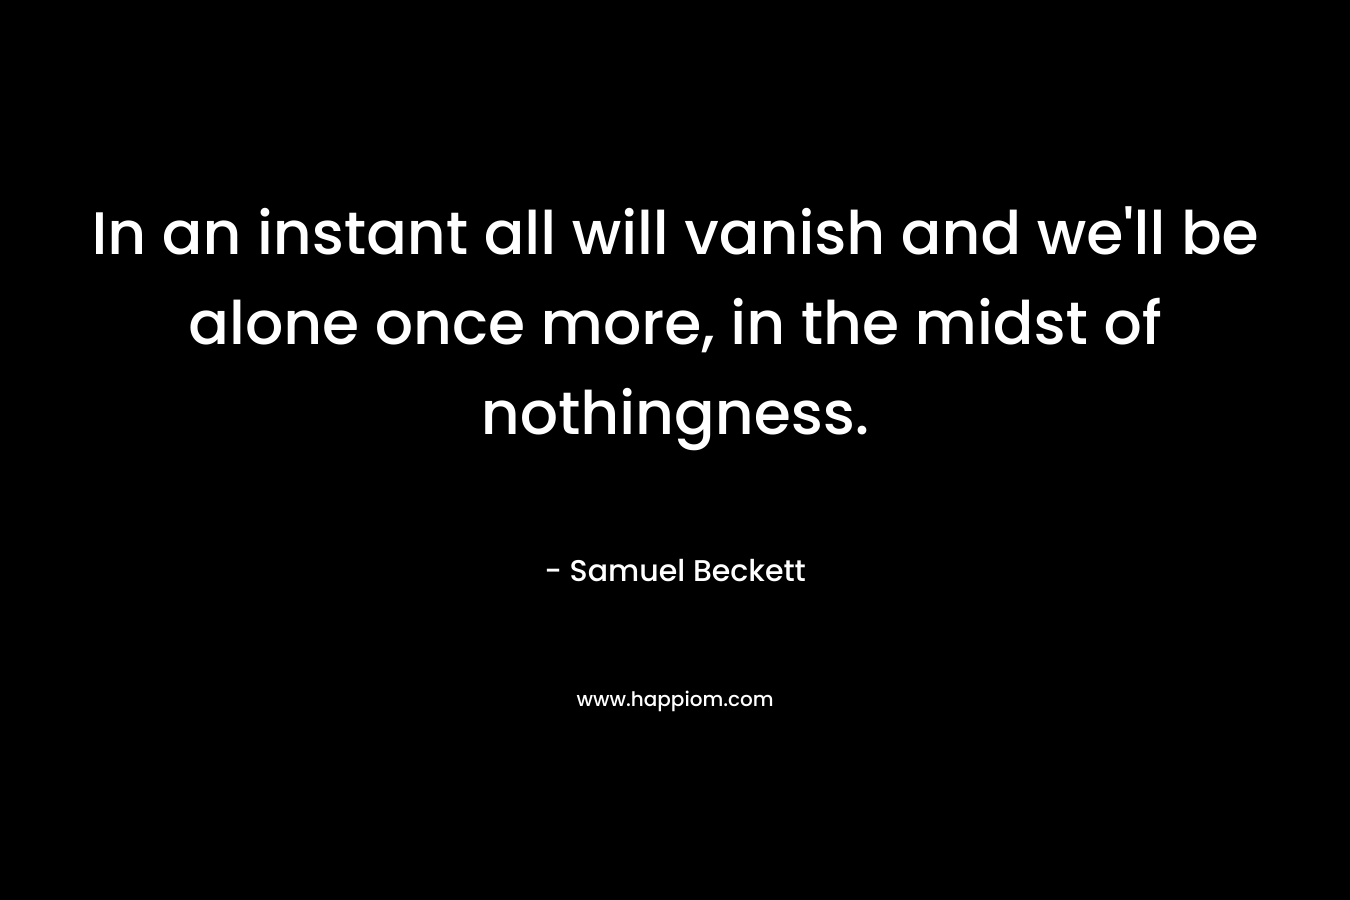 In an instant all will vanish and we’ll be alone once more, in the midst of nothingness. – Samuel Beckett